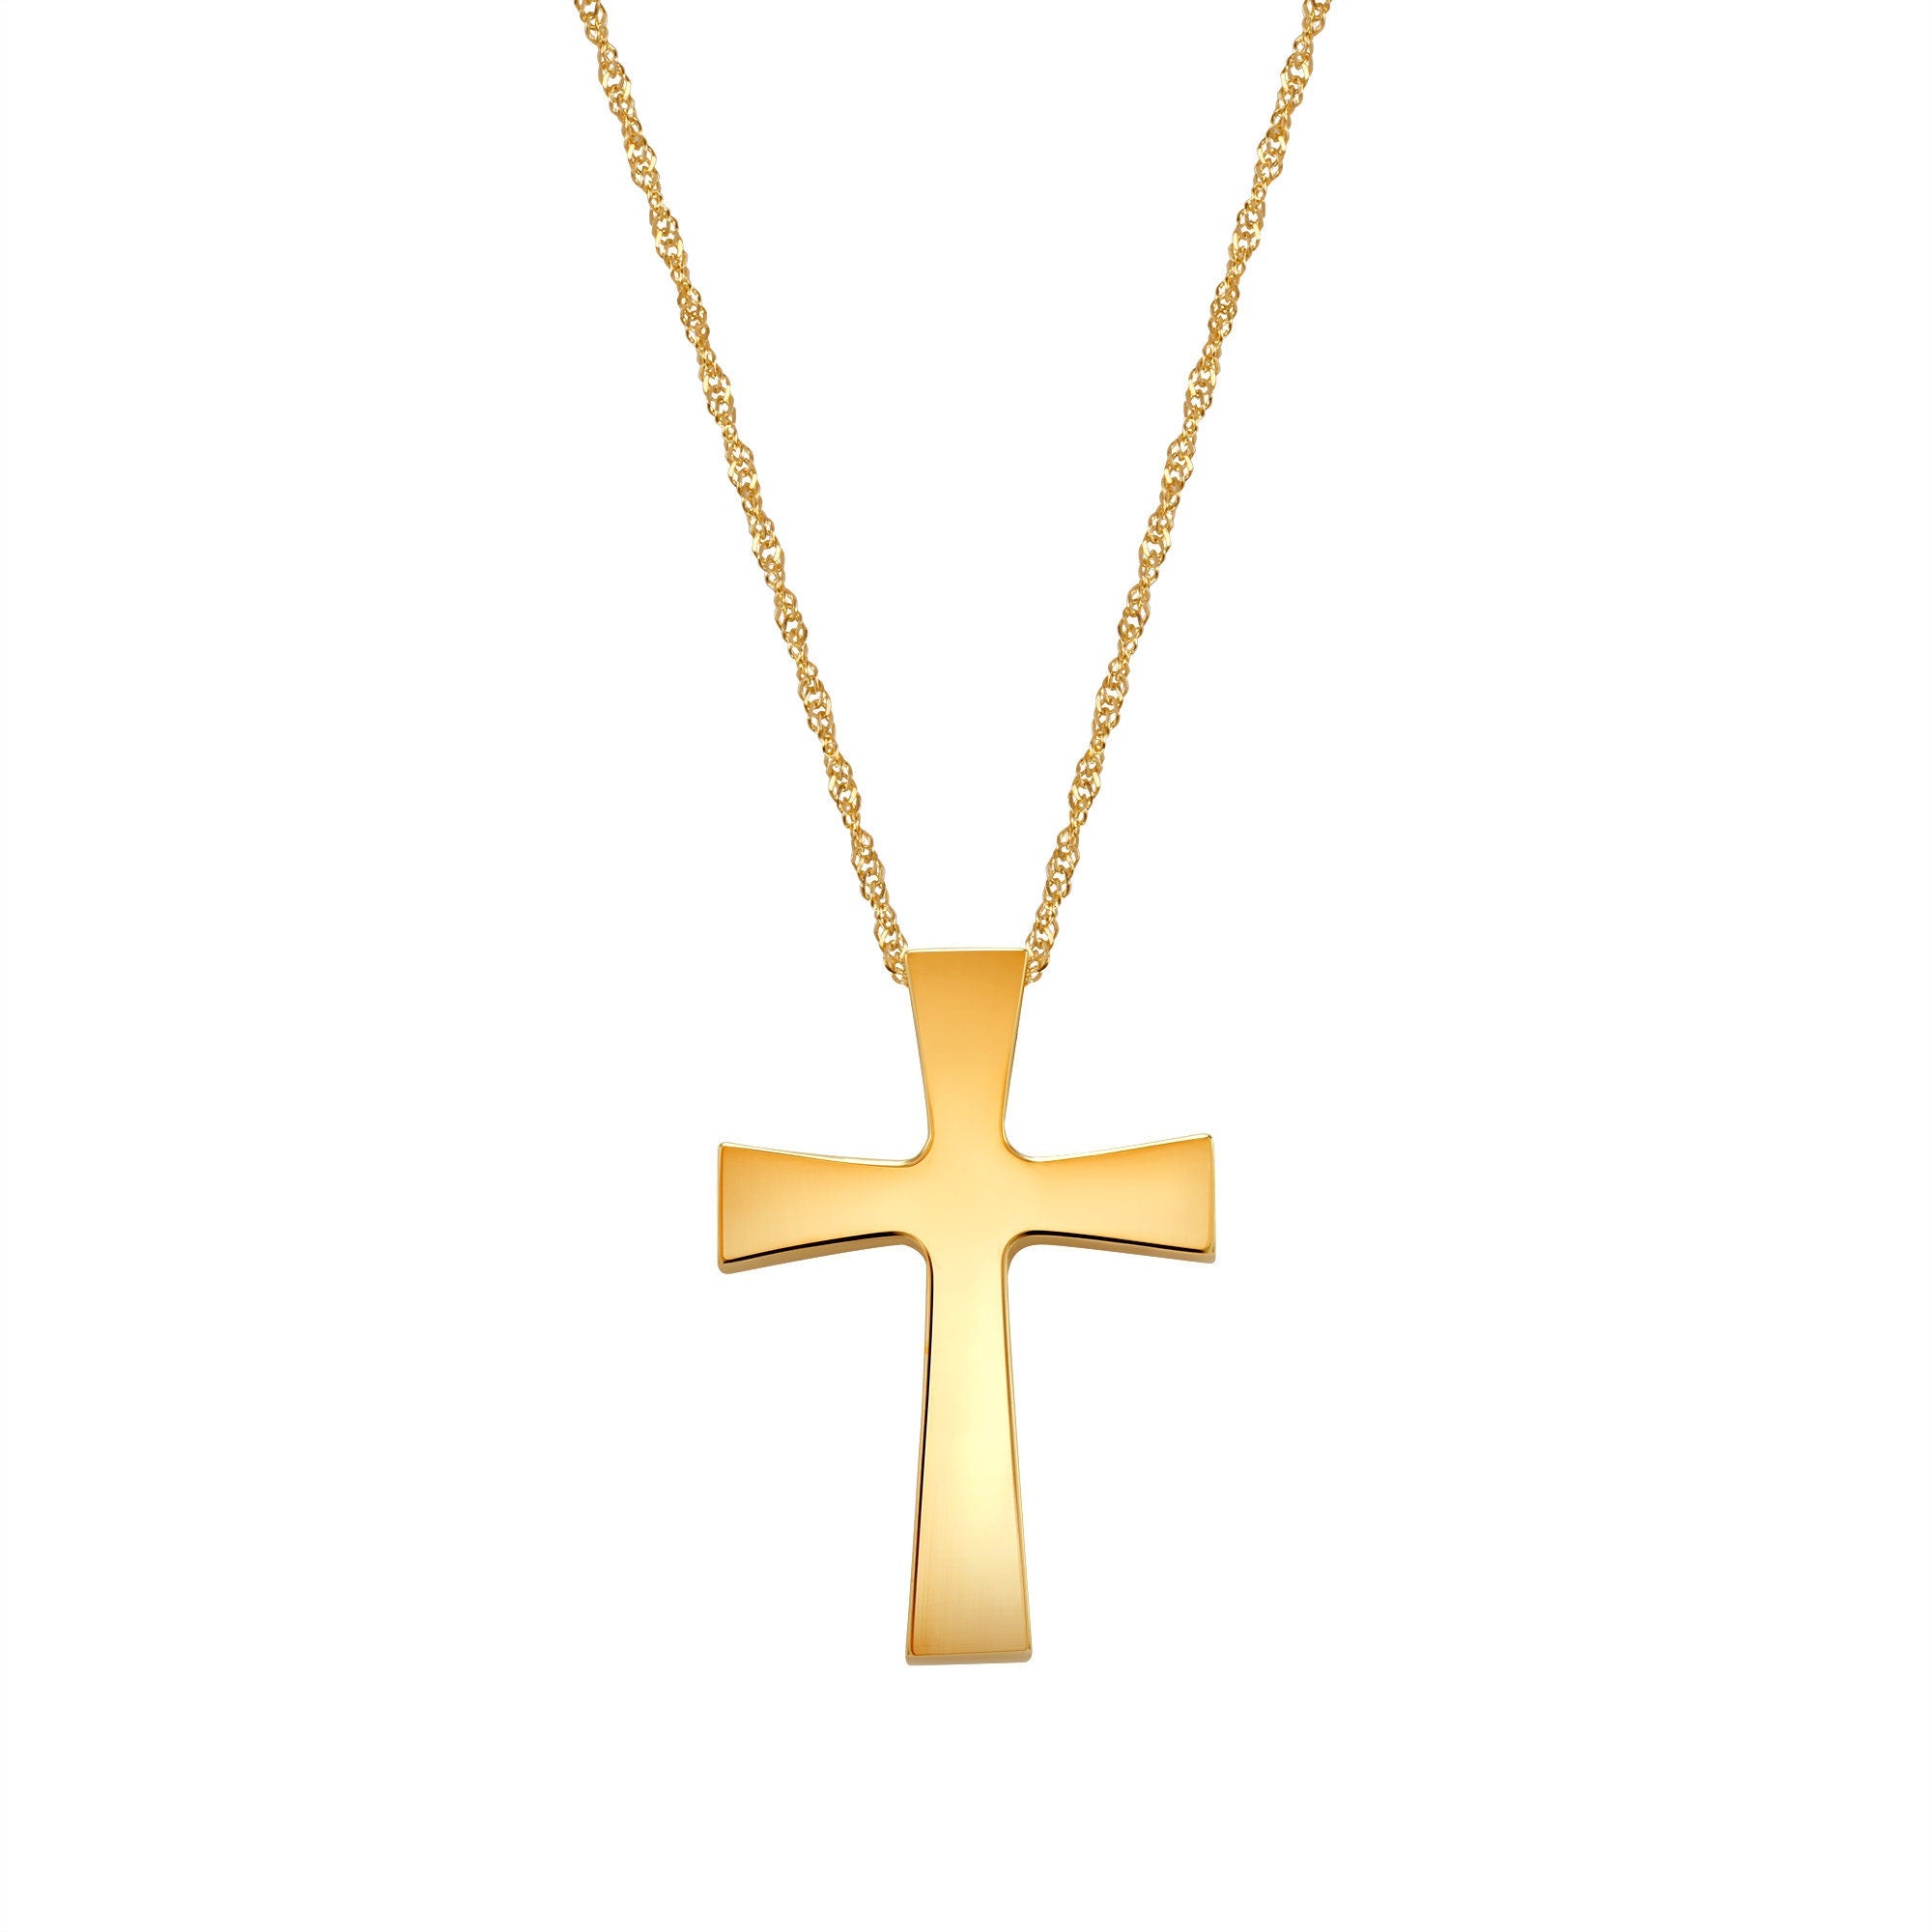 14k solid gold high polish cross with solid gold 18" chain